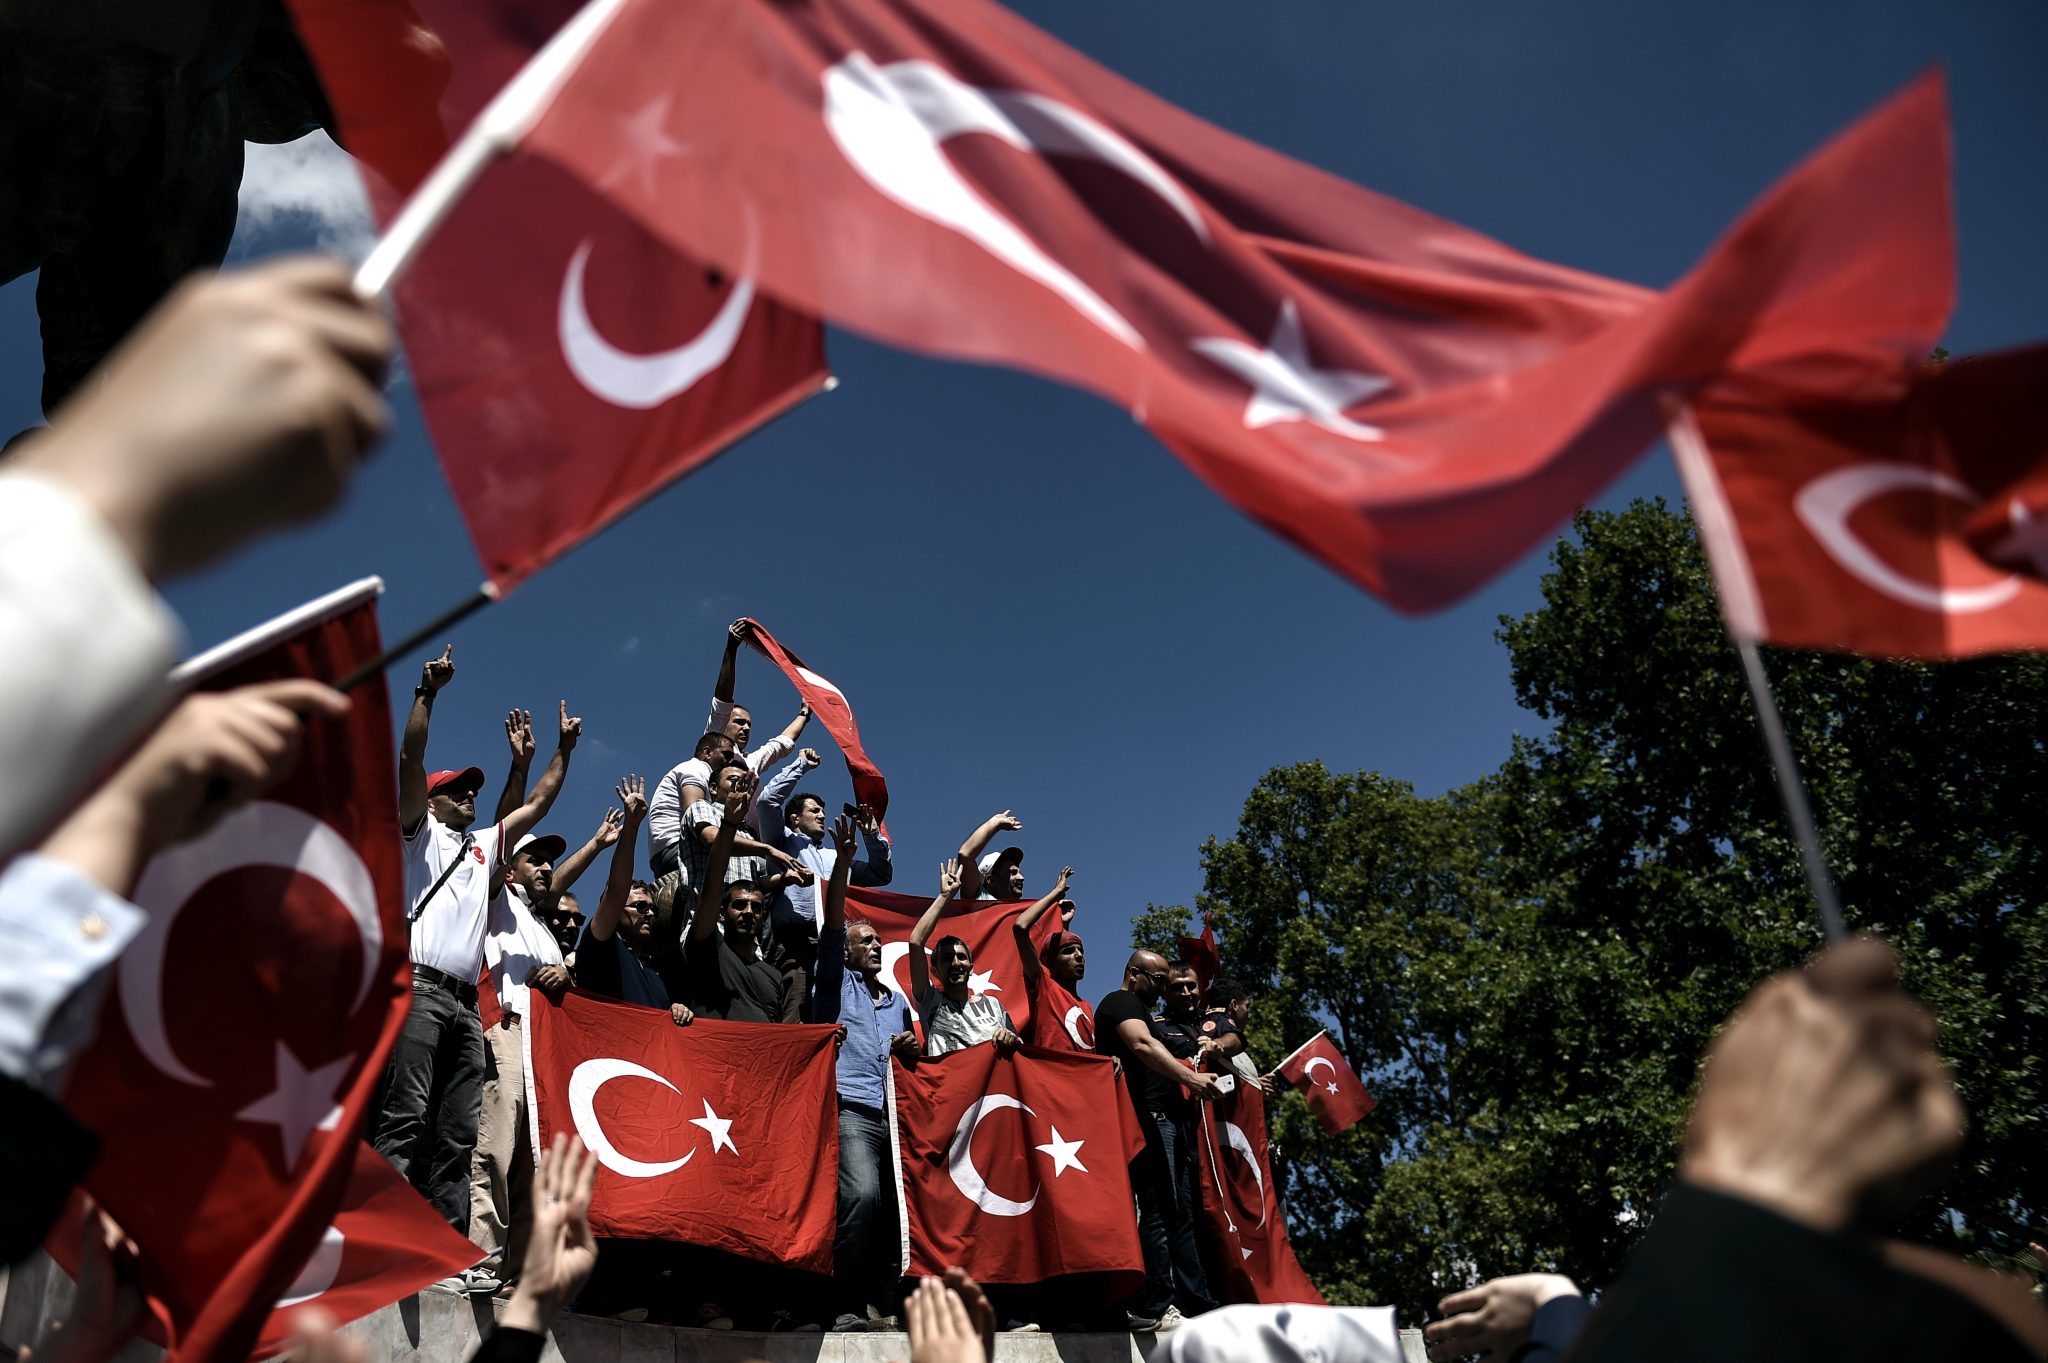 Pro-Erdogan supporters hold Turkish flags during a protest at the Sarachane park in Istanbul on July 19, 2016. The Turkish army said on July 19 that the vast majority of its members had no links with the July 15 attempted coup and warned that the putschists would face severe punishment. The armed forces blamed the "Fethullah Terrorist Organisation" (FETO) for the failed putsch, referring to Fethullah Gulen, a one-time ally turned foe of President Recep Tayyip Erdogan. Turkey's prime minister said on July 19 his government had sent four files to the United States, as Ankara seeks the extradition of US-based preacher Fethullah Gulen. / AFP PHOTO / ARIS MESSINIS